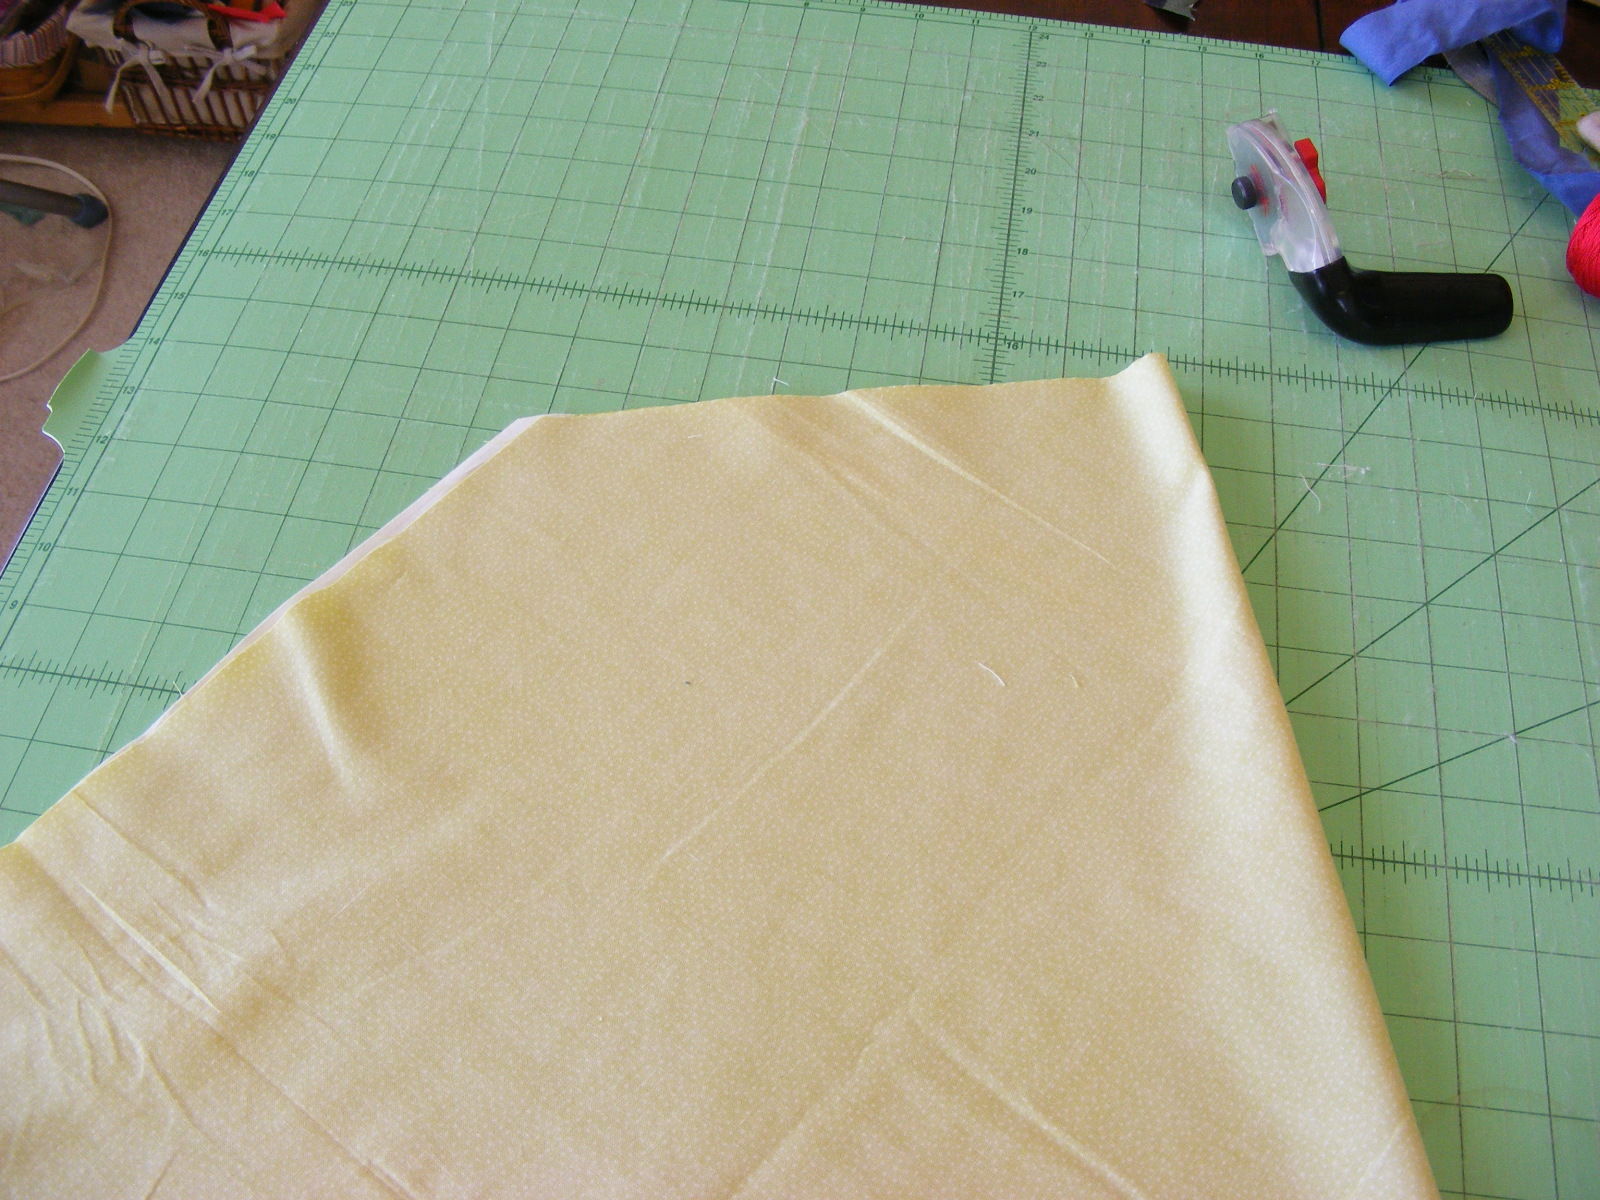 Camp Follower Bags and Quilts: Quilt Along #5 - Let's make vines!